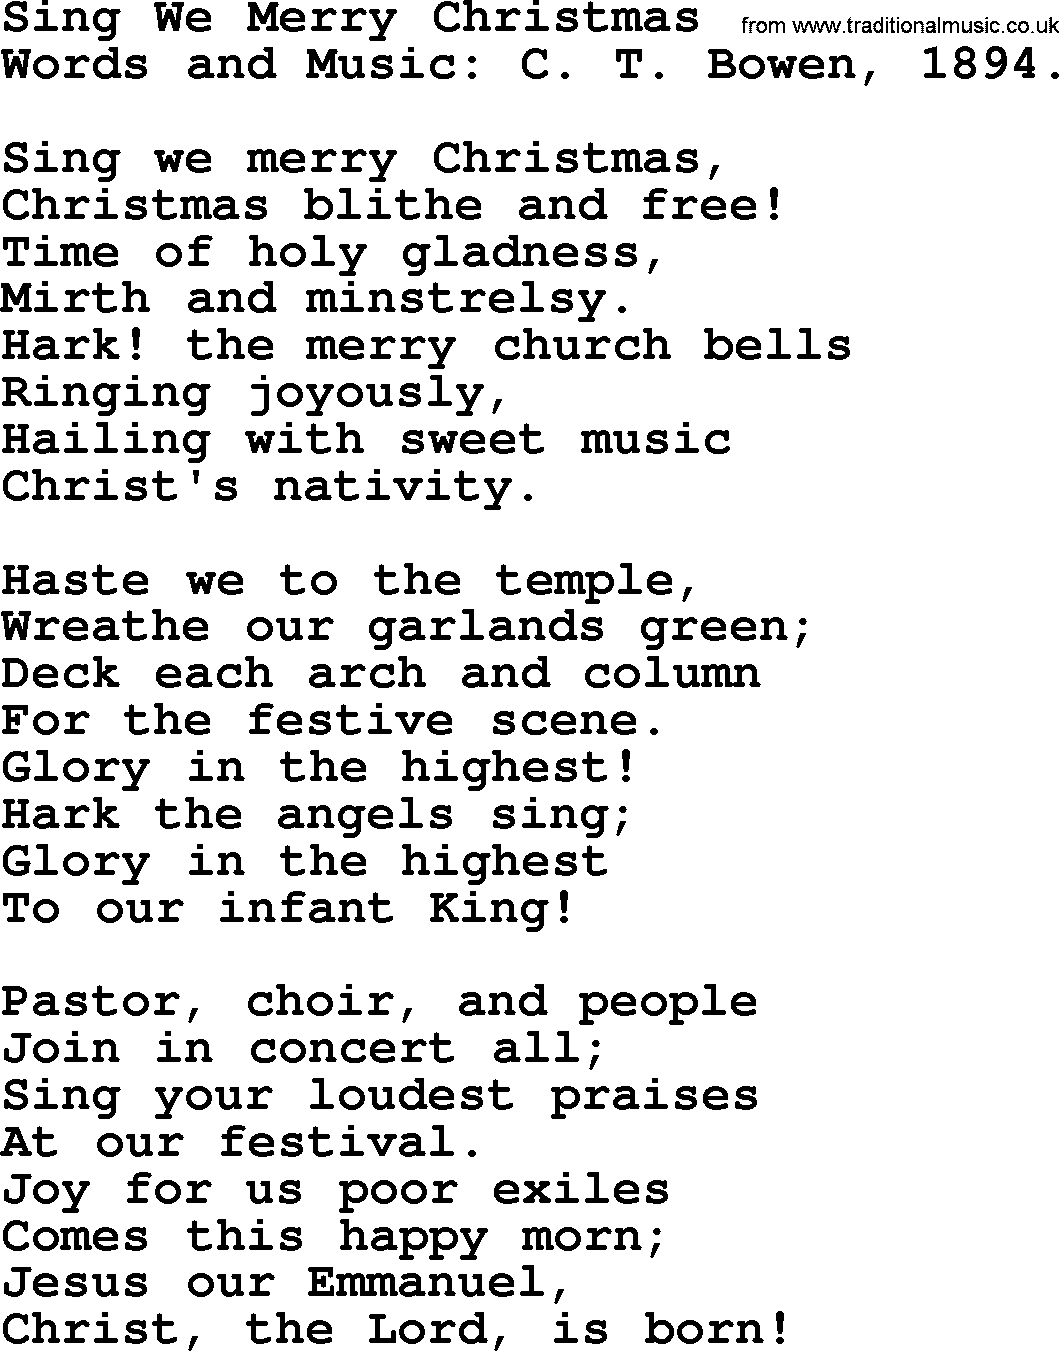 280 Christmas Hymns and songs with PowerPoints and PDF, title: Sing We Merry Christmas, lyrics, PPT and PDF